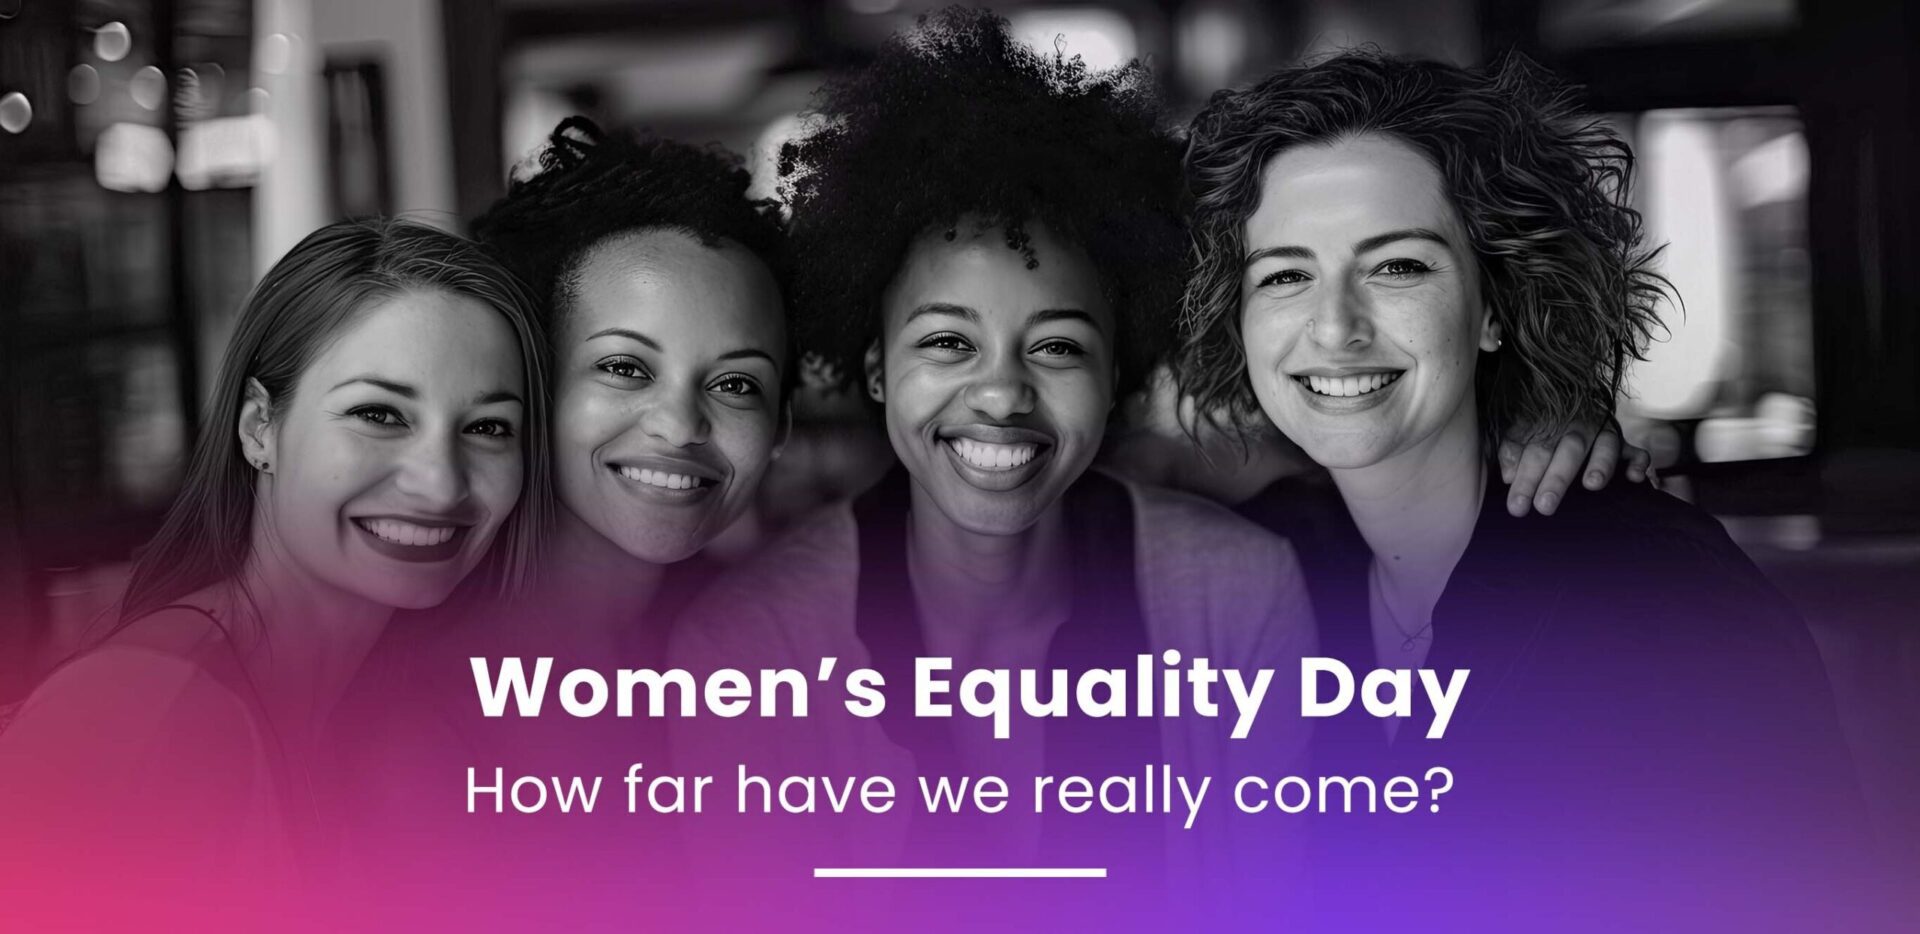 Women’s Equality Day: How far have we really come?